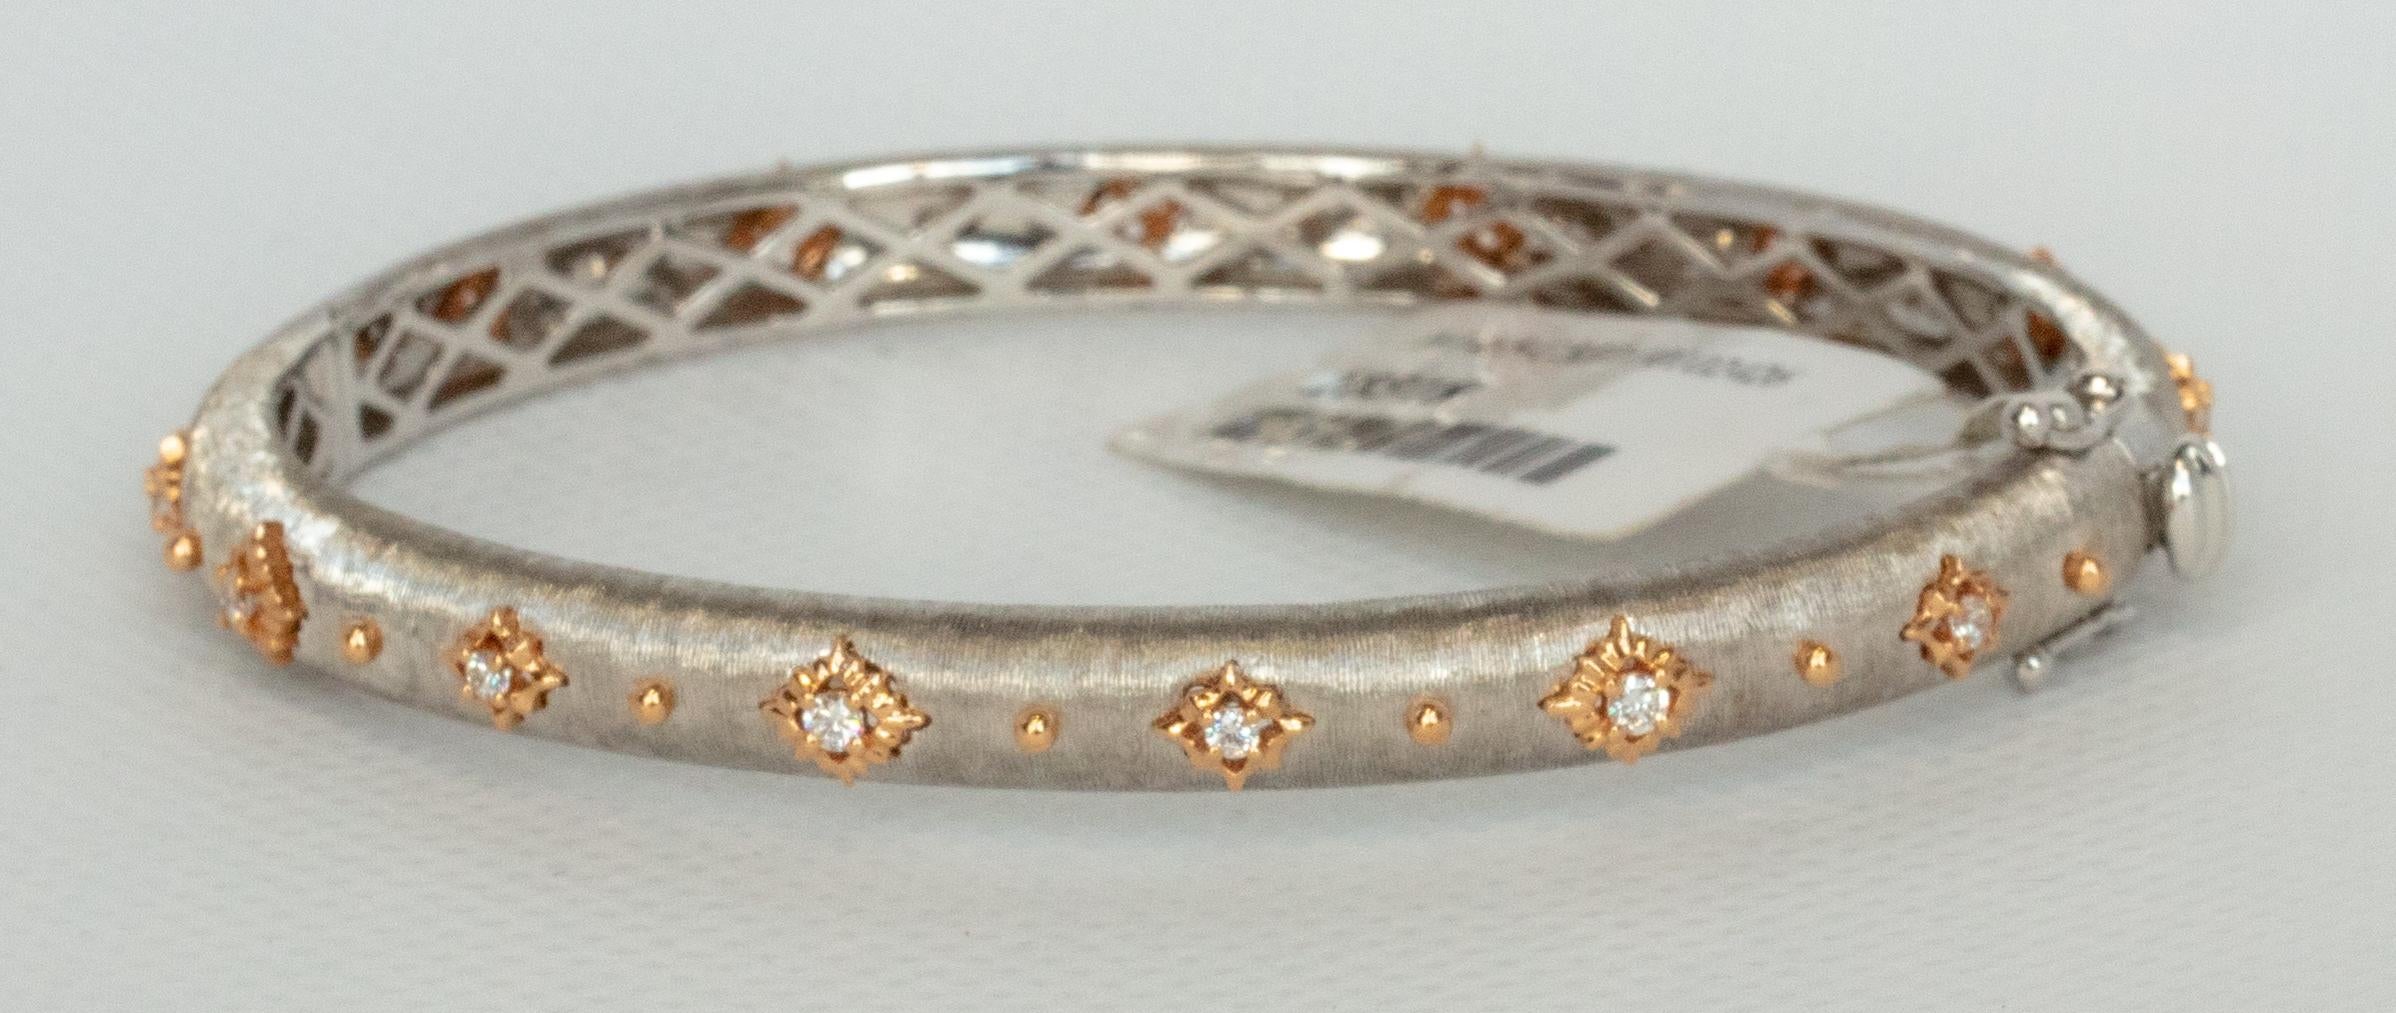 18K WHITE AND ROSE GOLD DIAMONDS BRACELET / Bangle
14 Round Diamonds - 0.28 cts
18KWR - 19.60 gm
Size - 48 x 58 cm / 2.28 x 1.89 inches

This unique piece is made using the Florentine exquisite technique of feather thin sophisticated hand